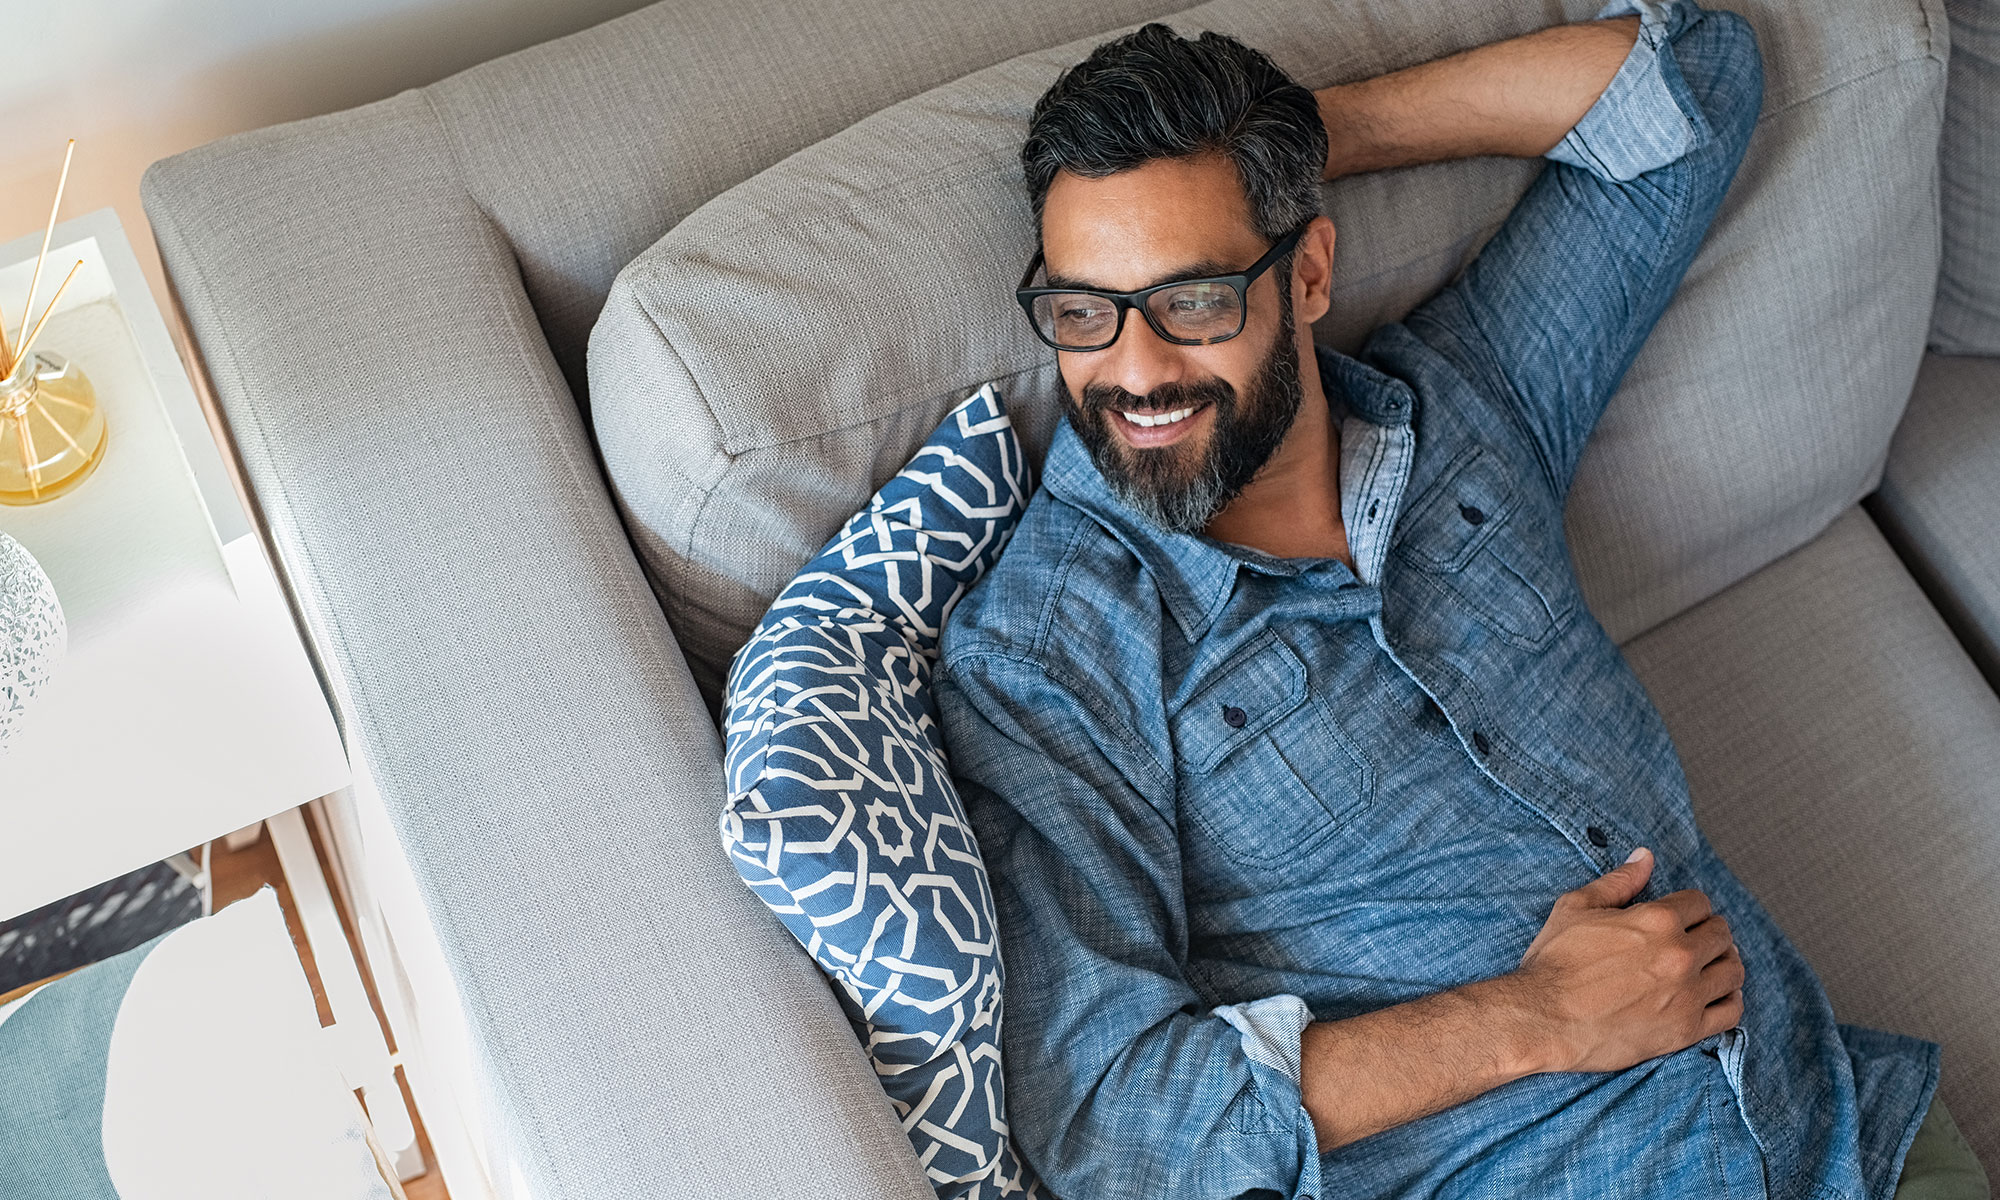 Man lounging on his couch at home smiling